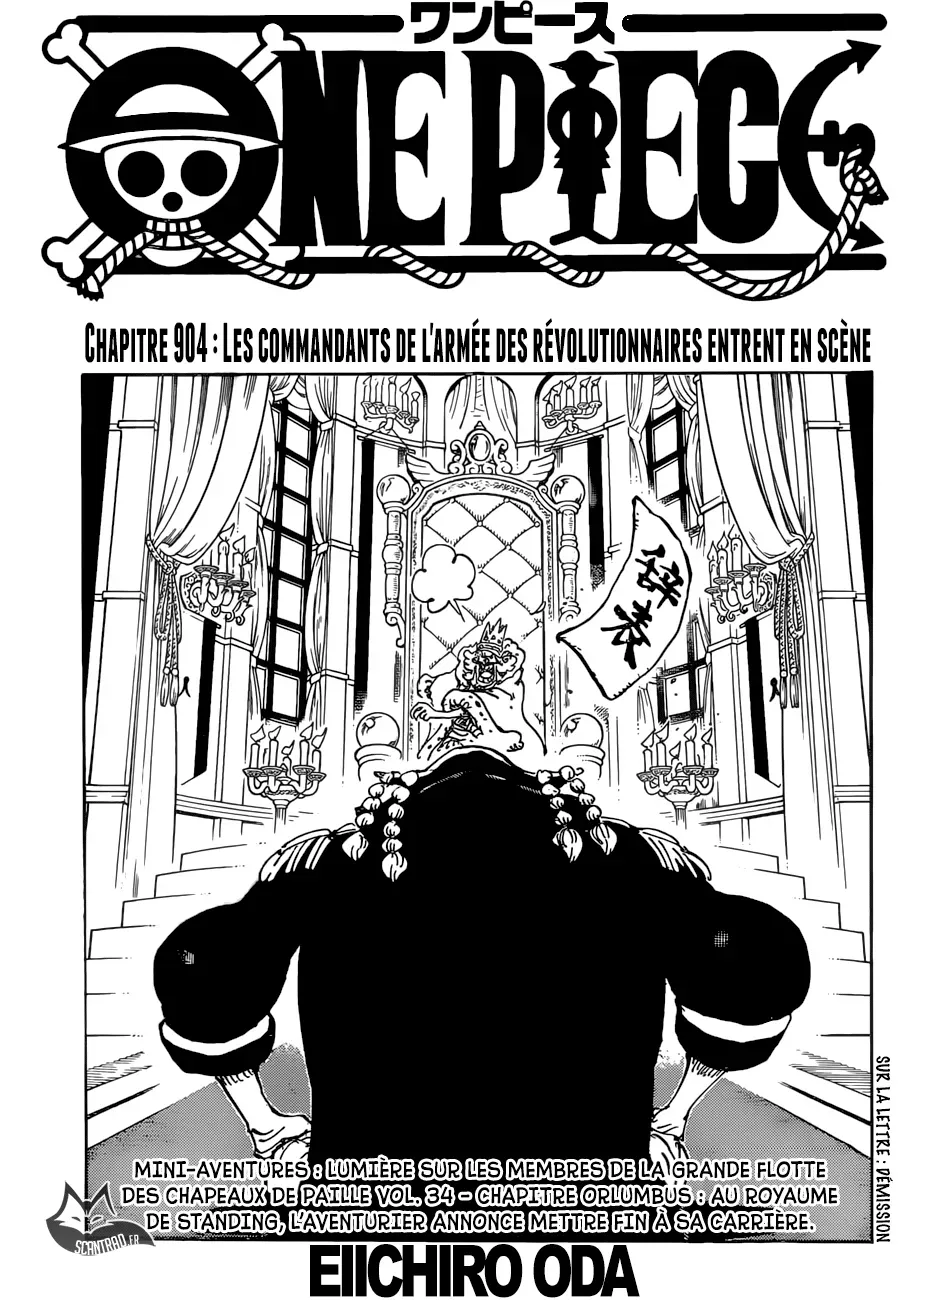 One Piece: Chapter chapitre-904 - Page 1